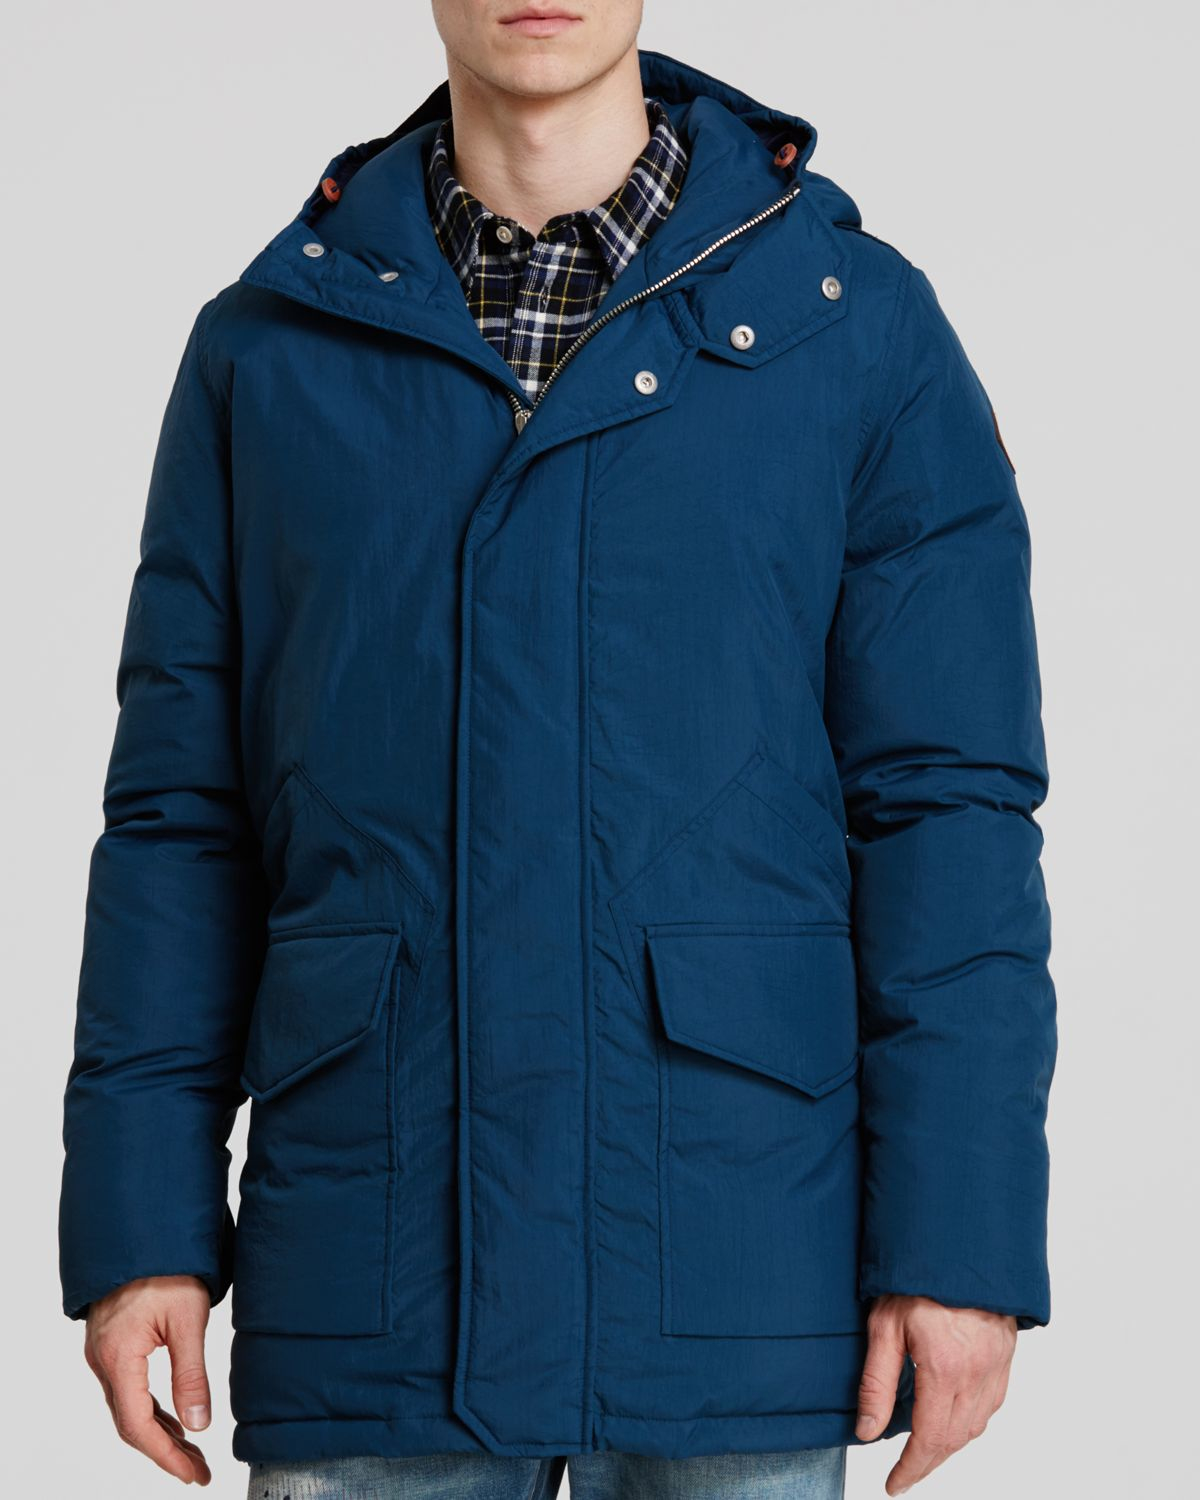 Lyst - Paul Smith Hooded Down Jacket in Blue for Men